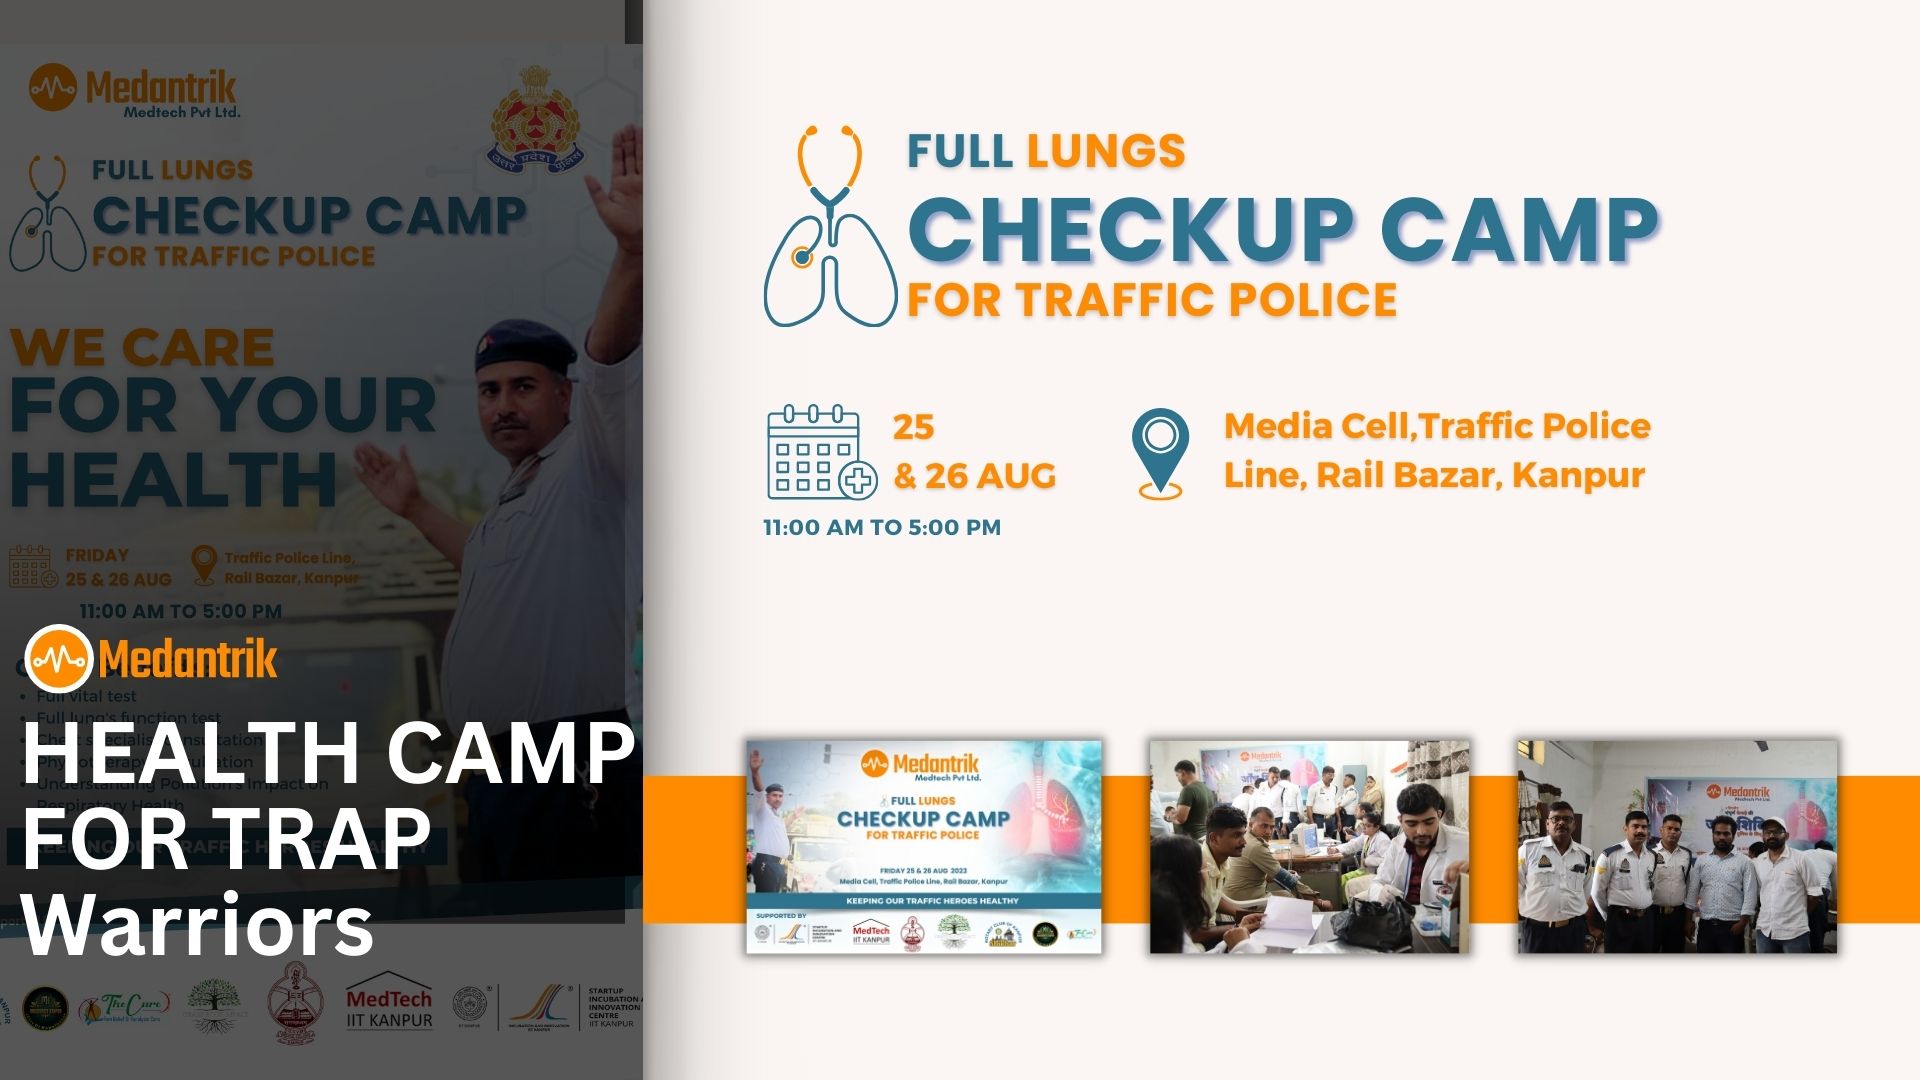 “Breathing Life into Kanpur’s Traffic Police: TRAP Warriors Full Lungs Checkup Camp Impact”